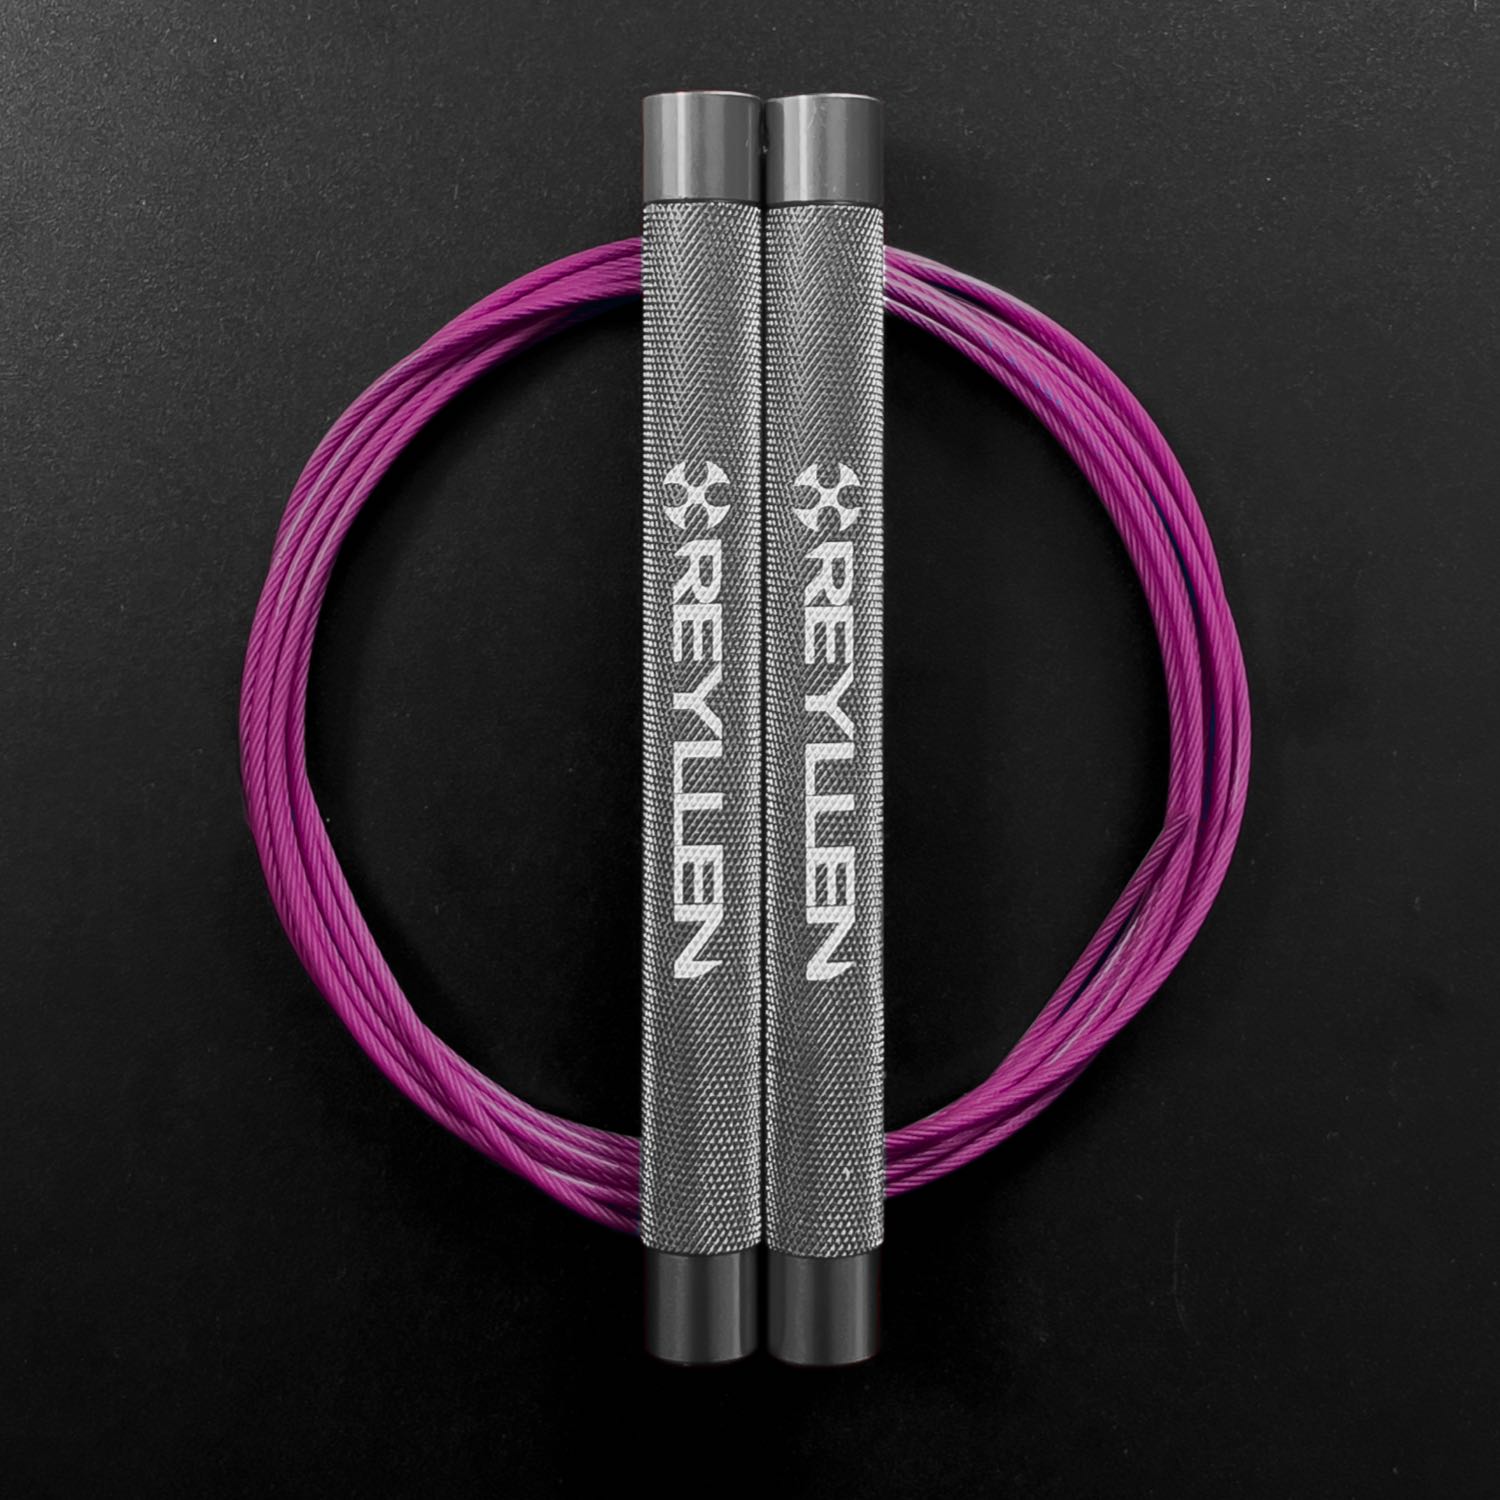 Reyllen Flare Mx Speed Skipping Jump Rope - Aluminium Handles - silver with pink nylon coated cable